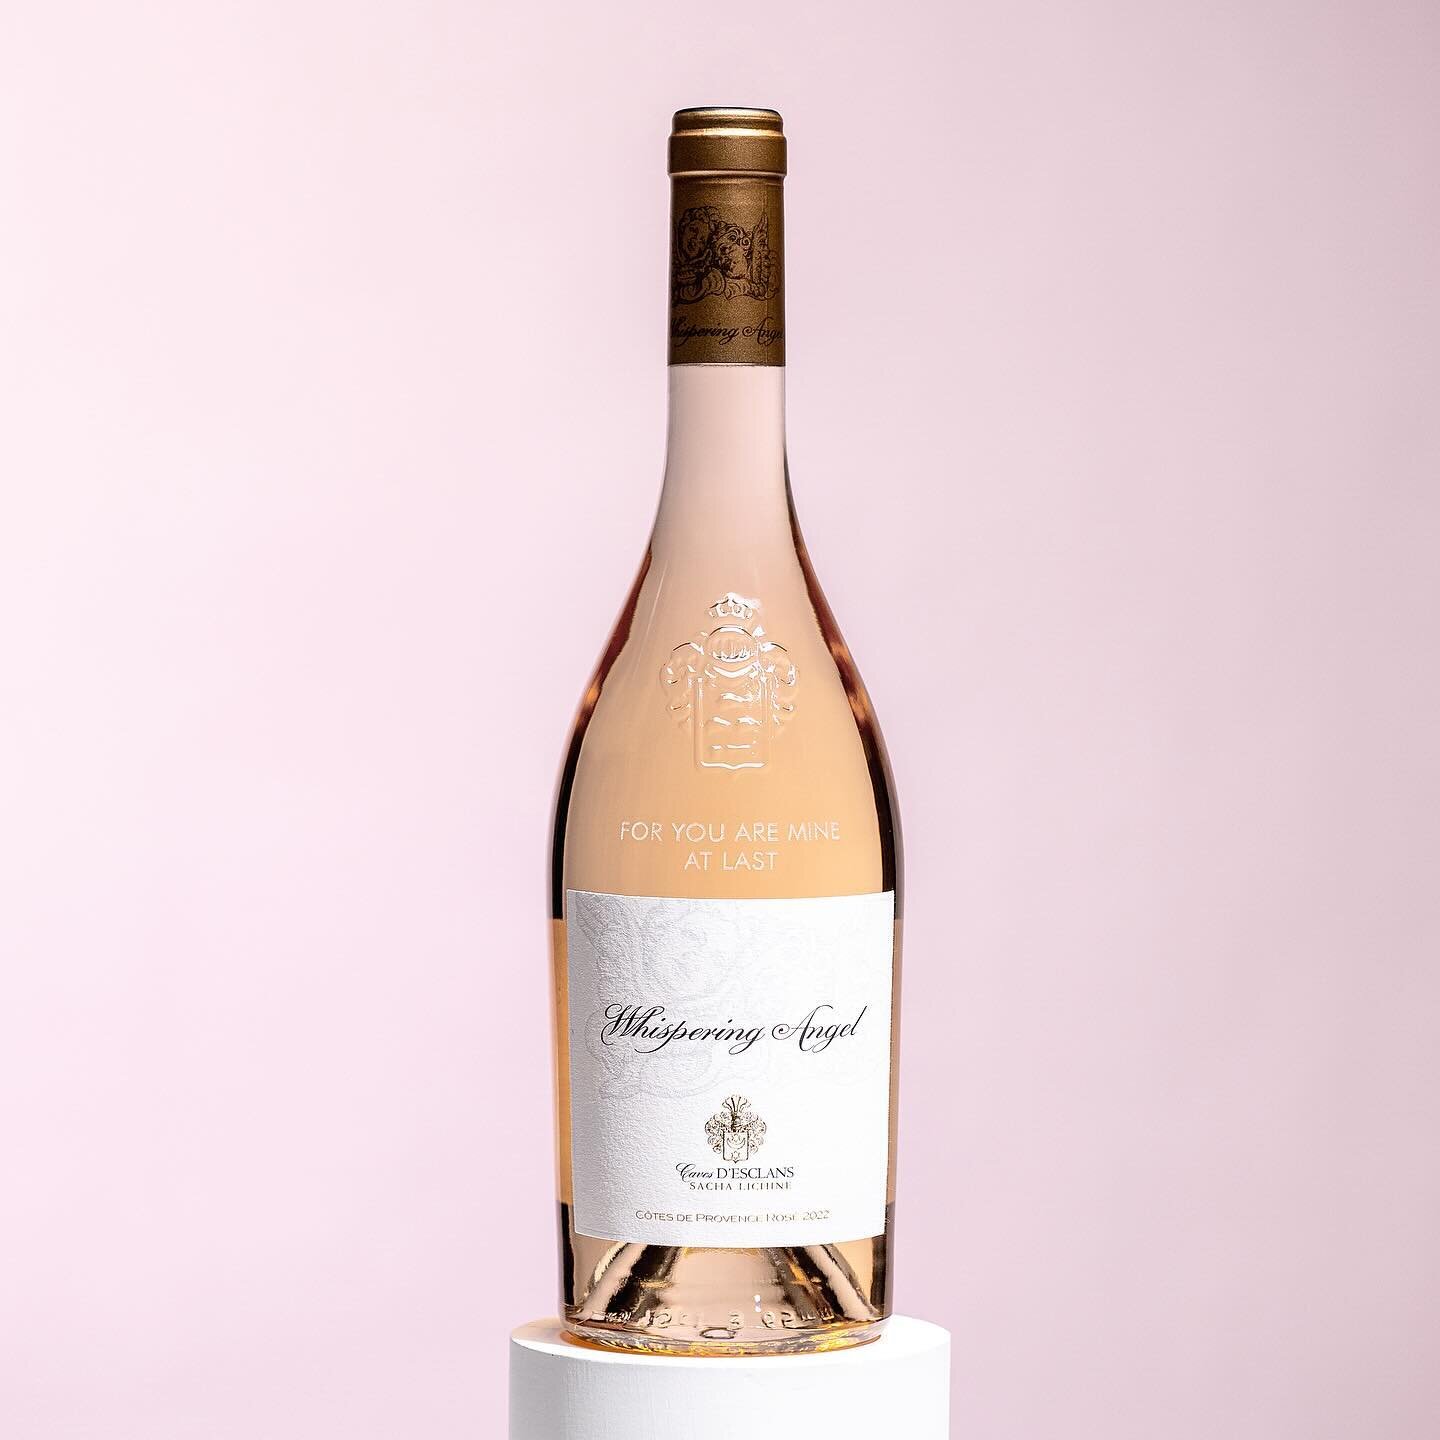 Say it with @thewhisperingangel ros&eacute; this #ValentinesDay. Personalize a bottle for the one you adore on esclans.com. Shop now for the perfect gift. 

Please enjoy responsibly. 
#WhisperingAngel #ChateaudEsclans #AuraGroupe